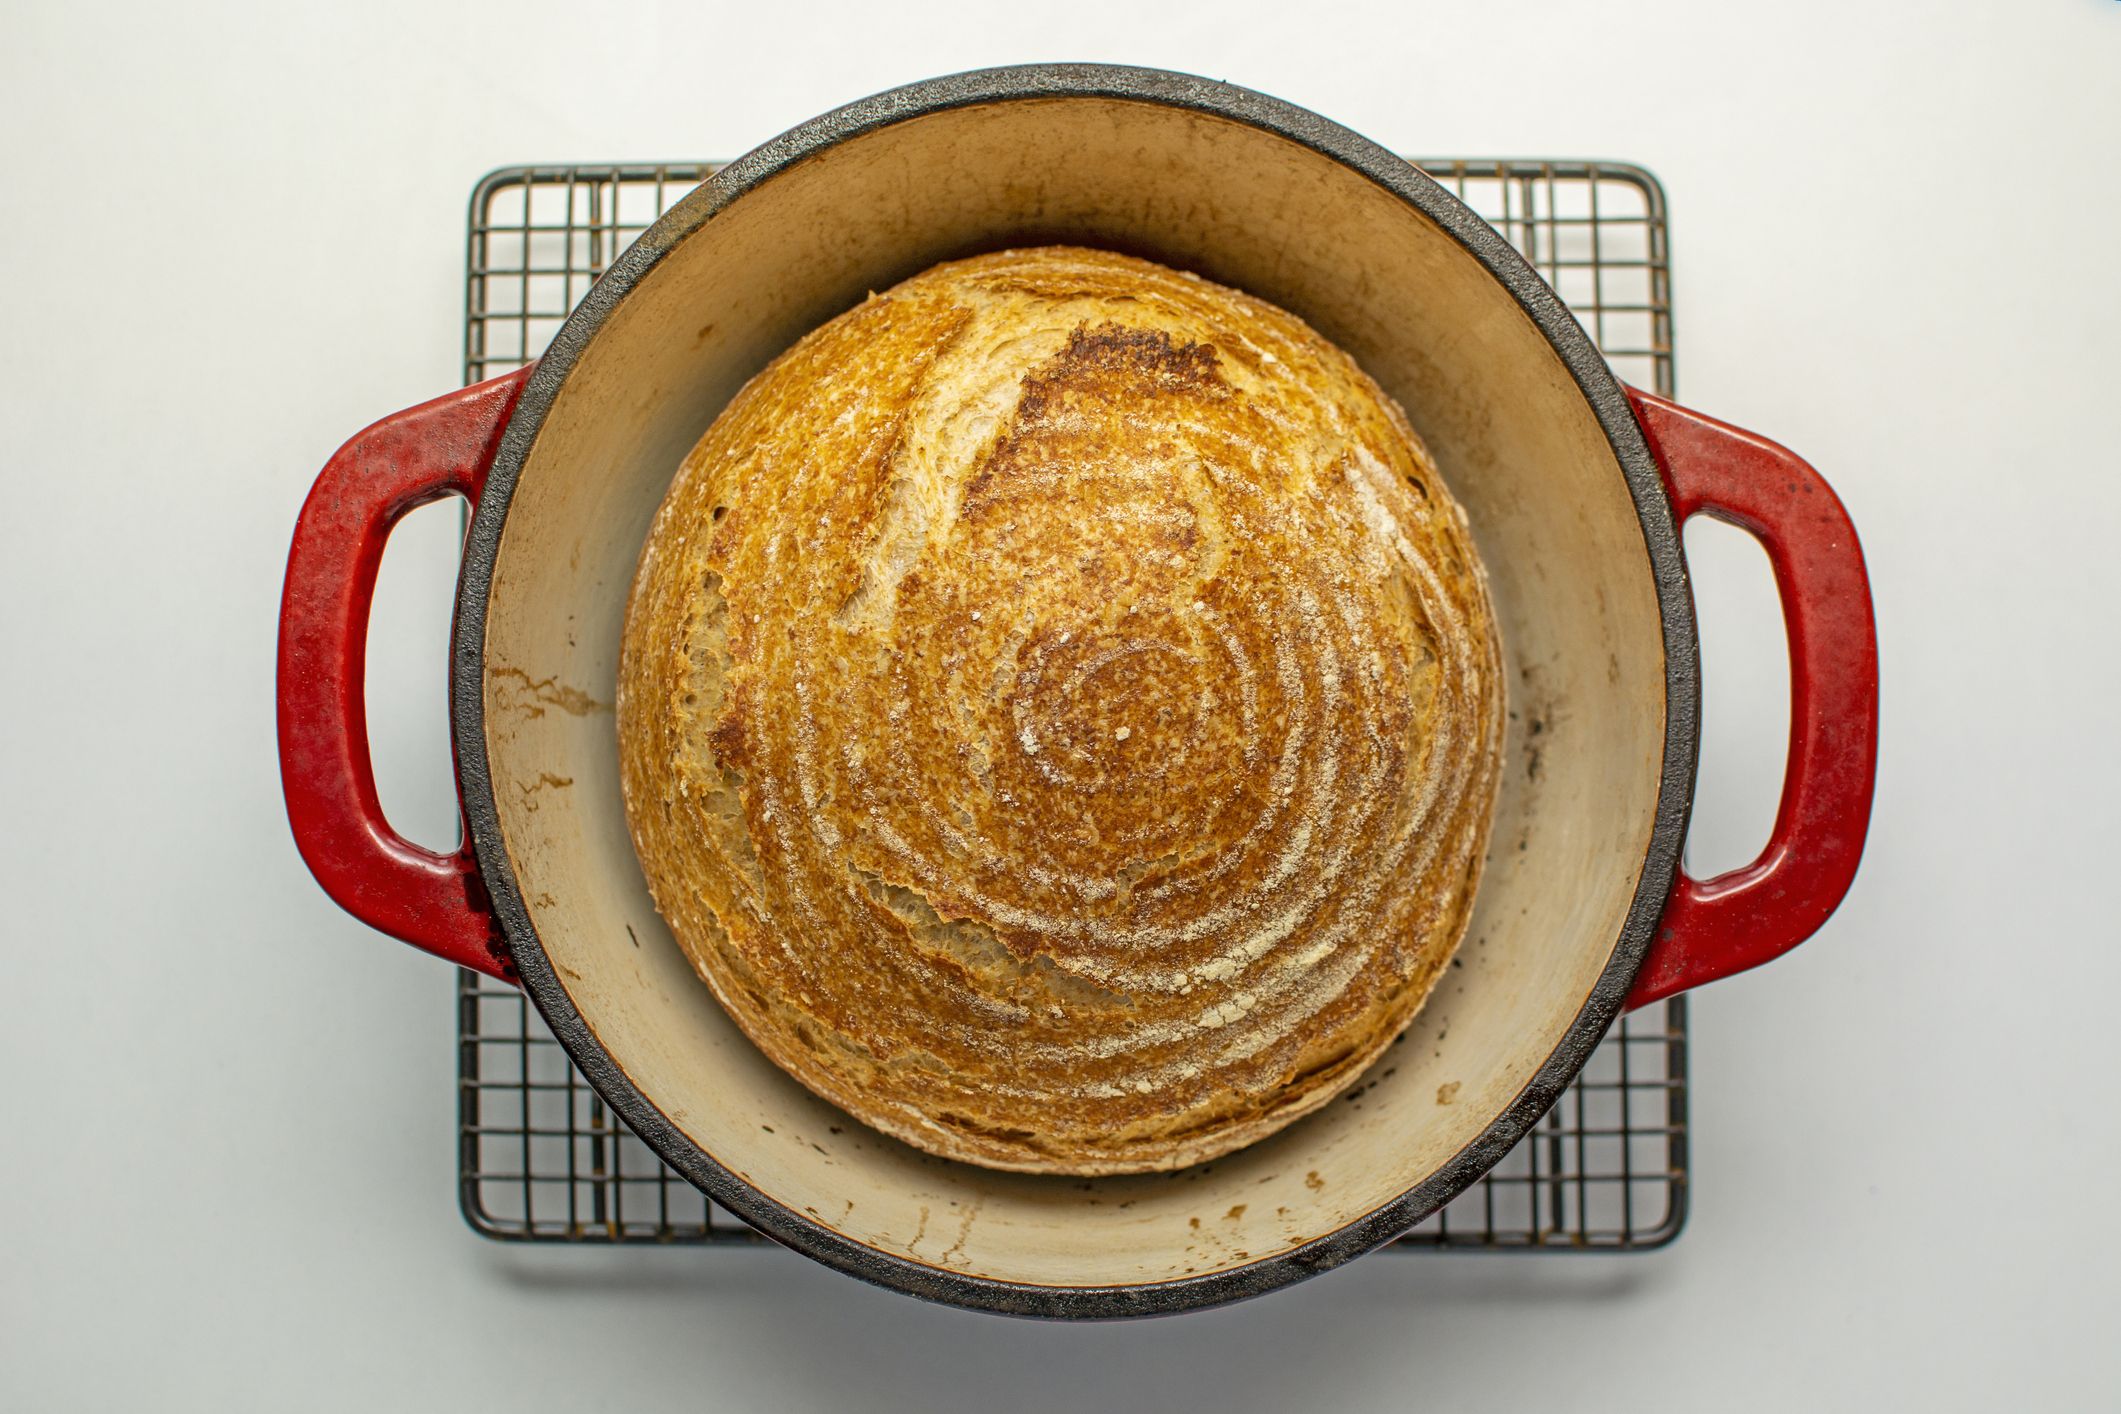 https://hips.hearstapps.com/hmg-prod/images/whole-wheat-bread-baked-in-dutch-oven-cast-iron-royalty-free-image-1599677680.jpg